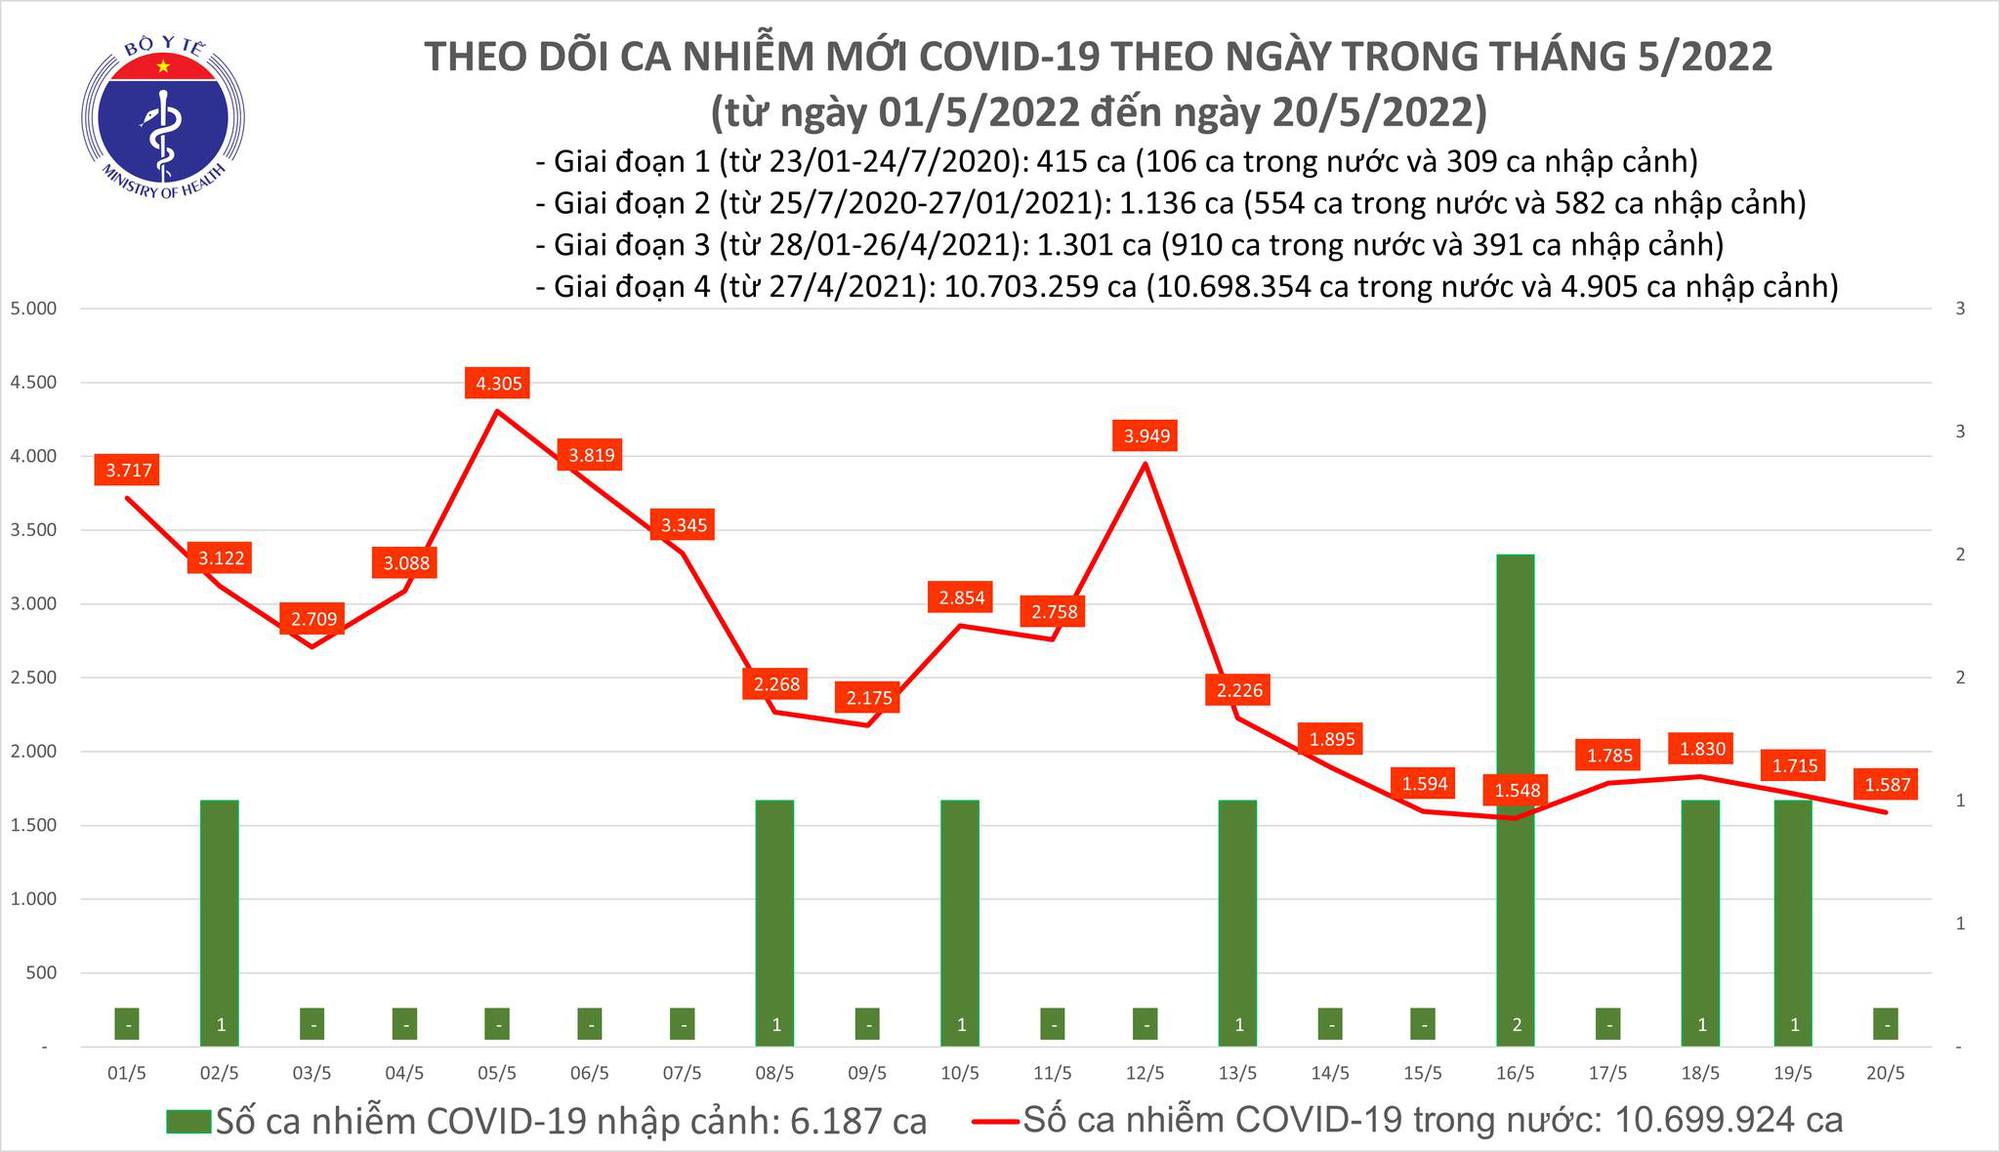 Covid-19 epidemic on May 20: Nearly 16,000 new cases added - Photo 1.